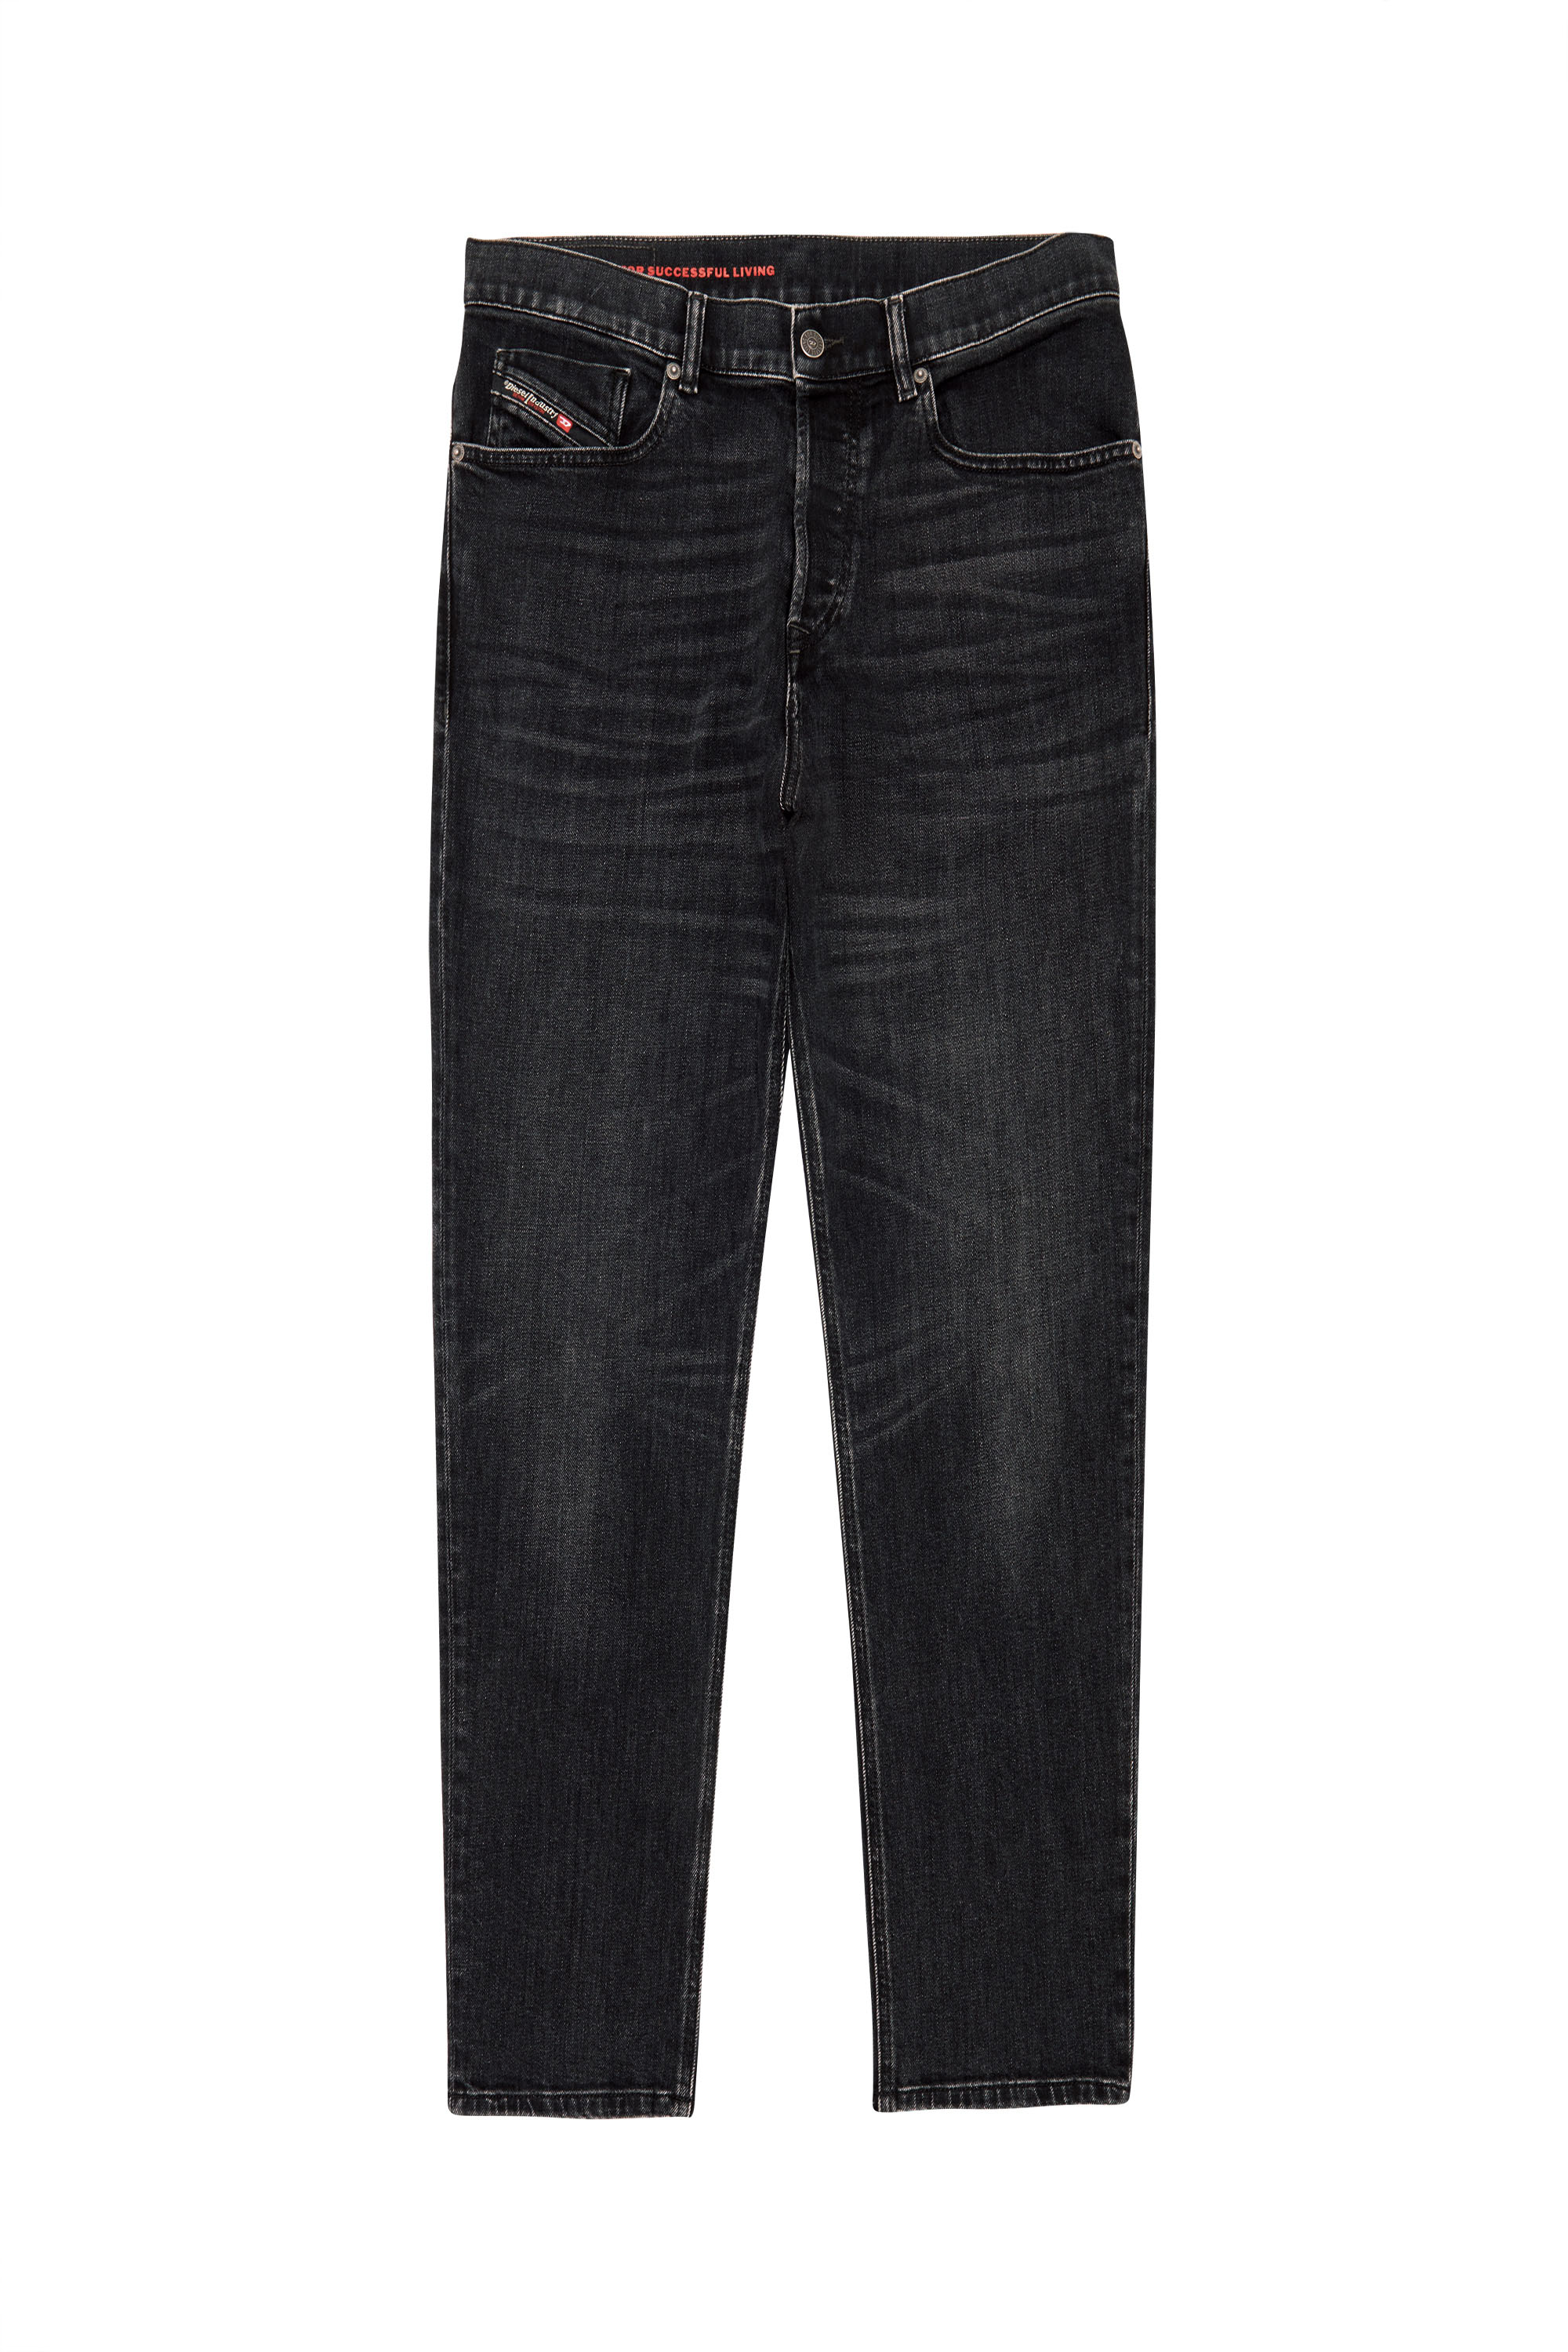 Tapered Jeans 2005 D-Fining 09B83, Nero/Grigio scuro - Jeans